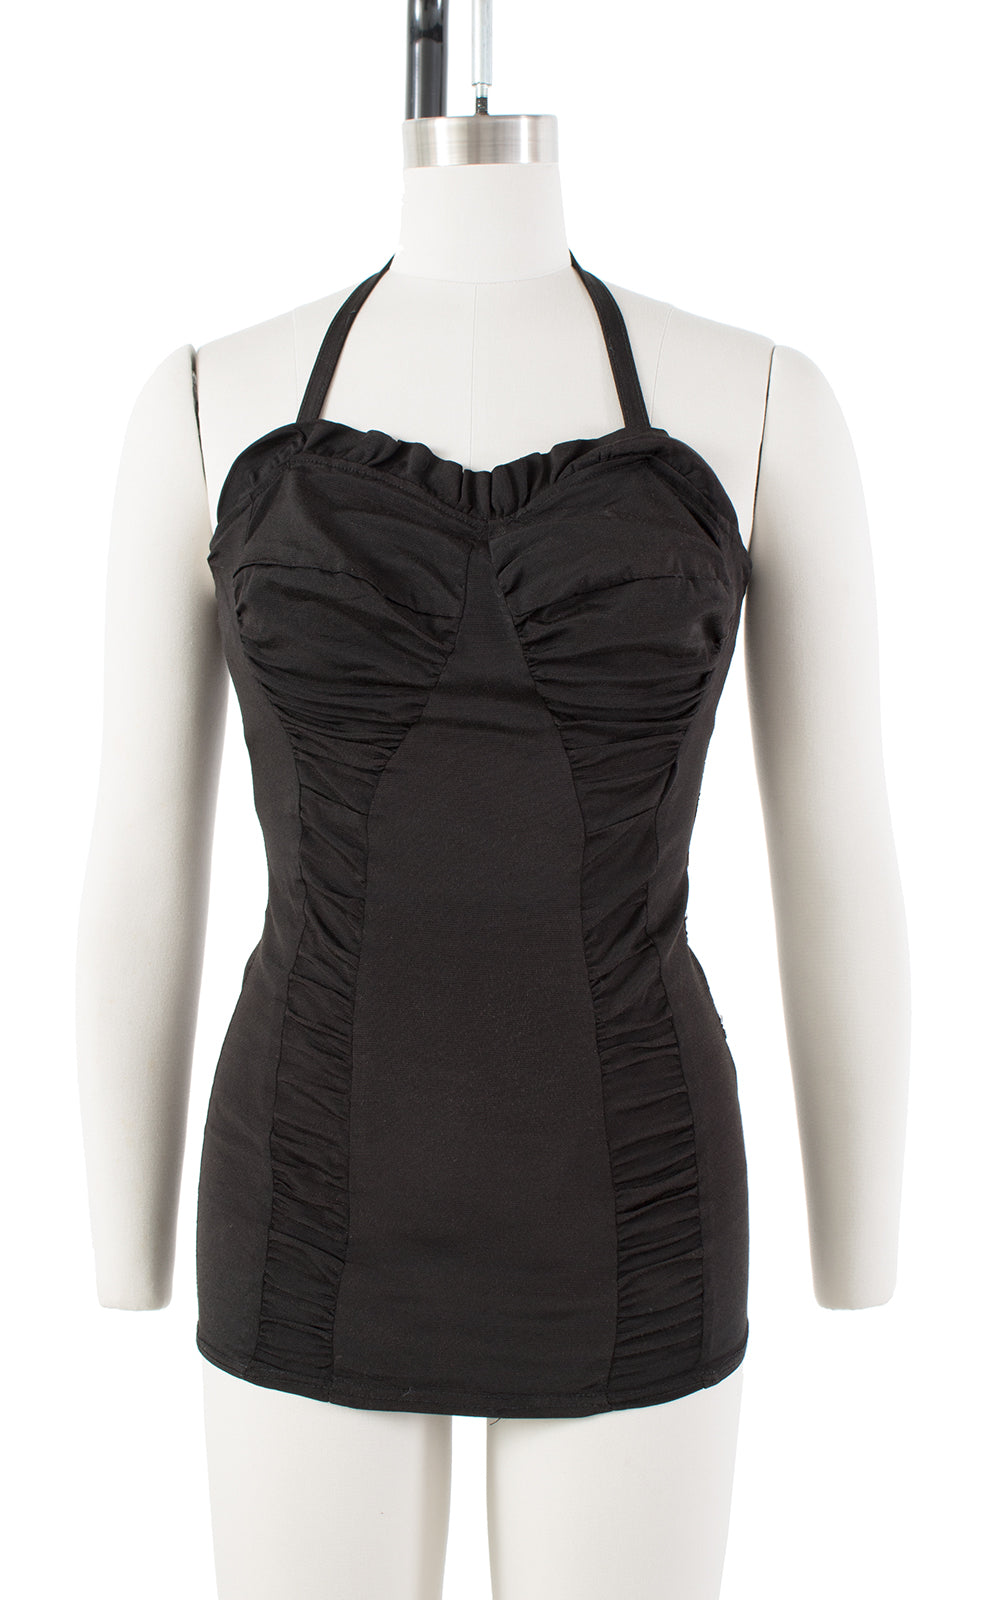 1950s Ruched Black Halter or Strapless Swimsuit